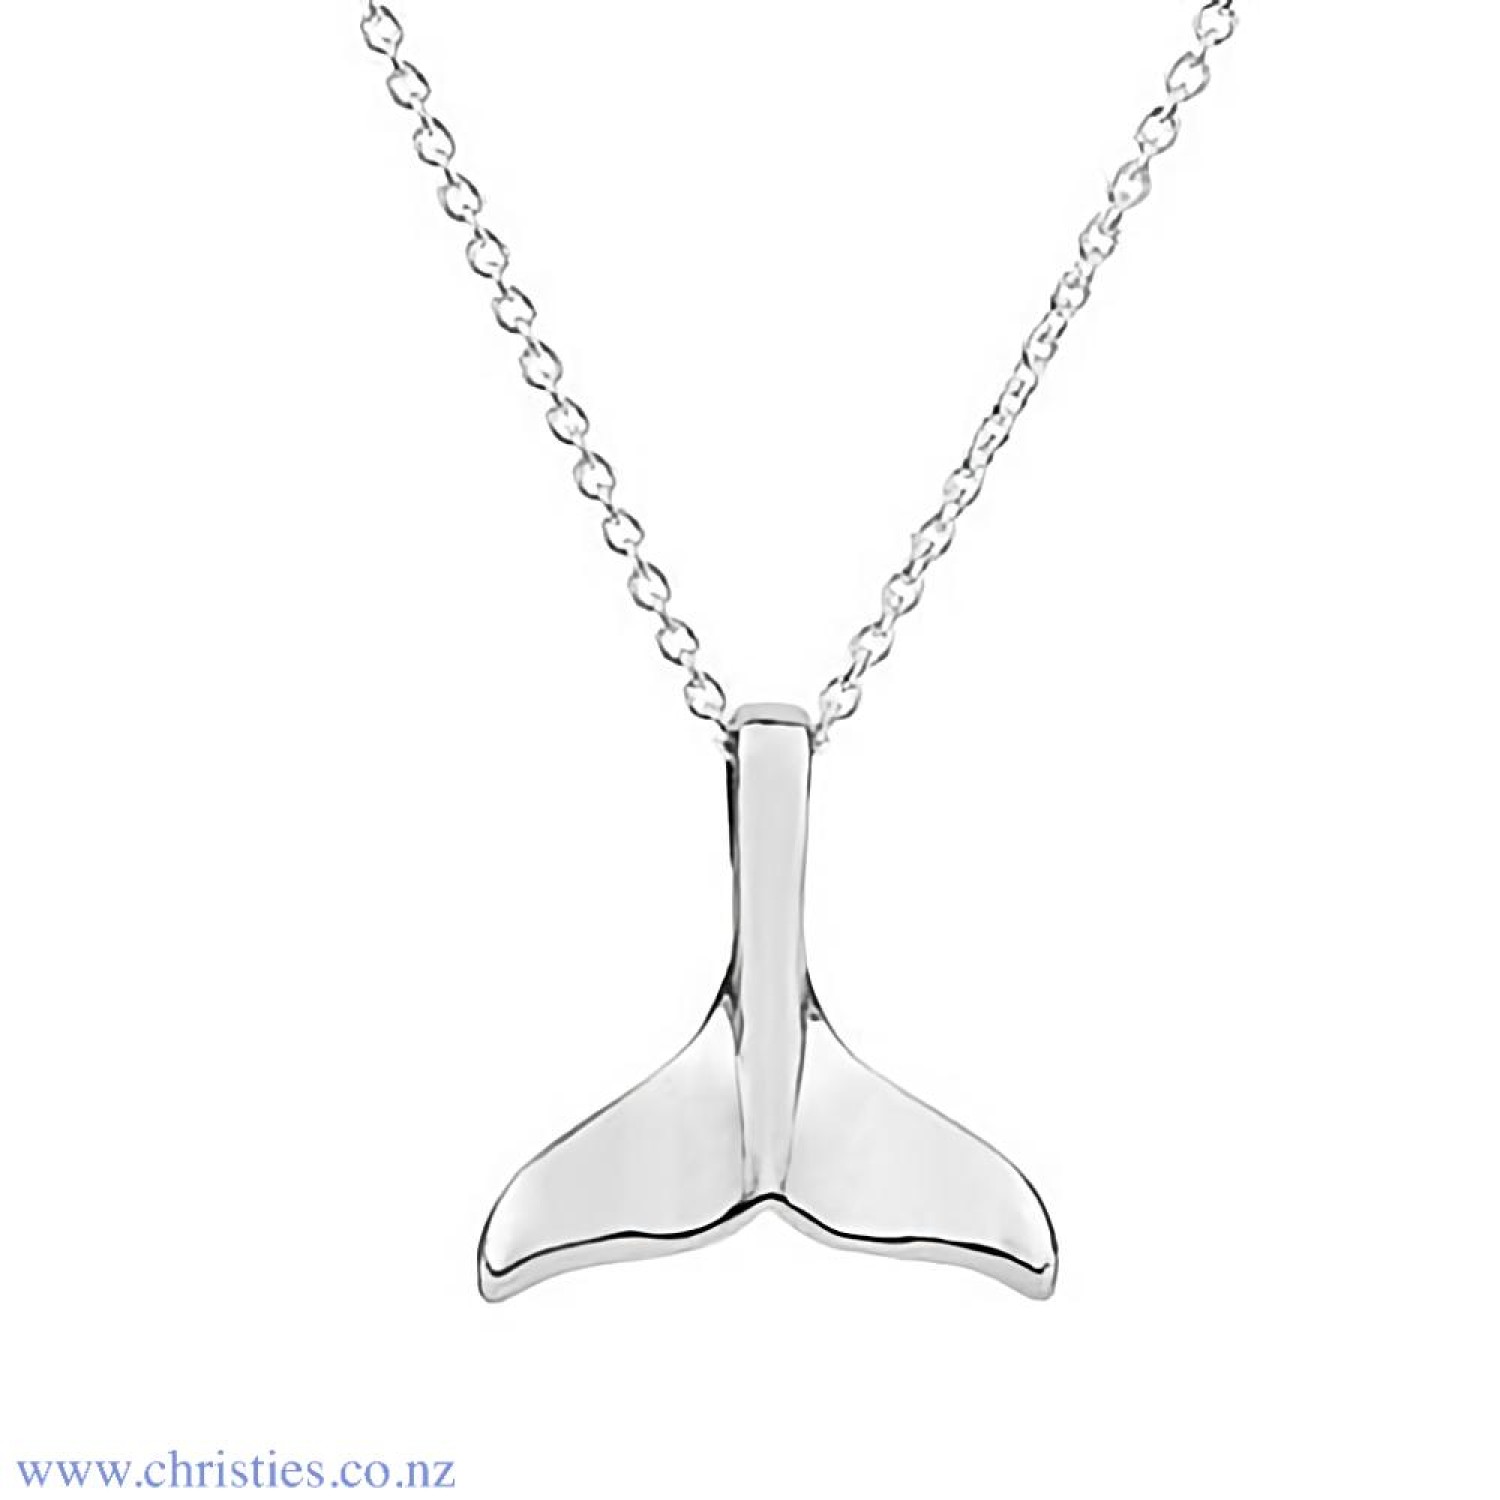 3P40005 Evolve Whale Tail Pendant. As one of the world’s largest and most revered marine mammals, whales represent great strength and a connection to the ocean. This pendant celebrates inner strength and determination, empowering the wearer to achieve the